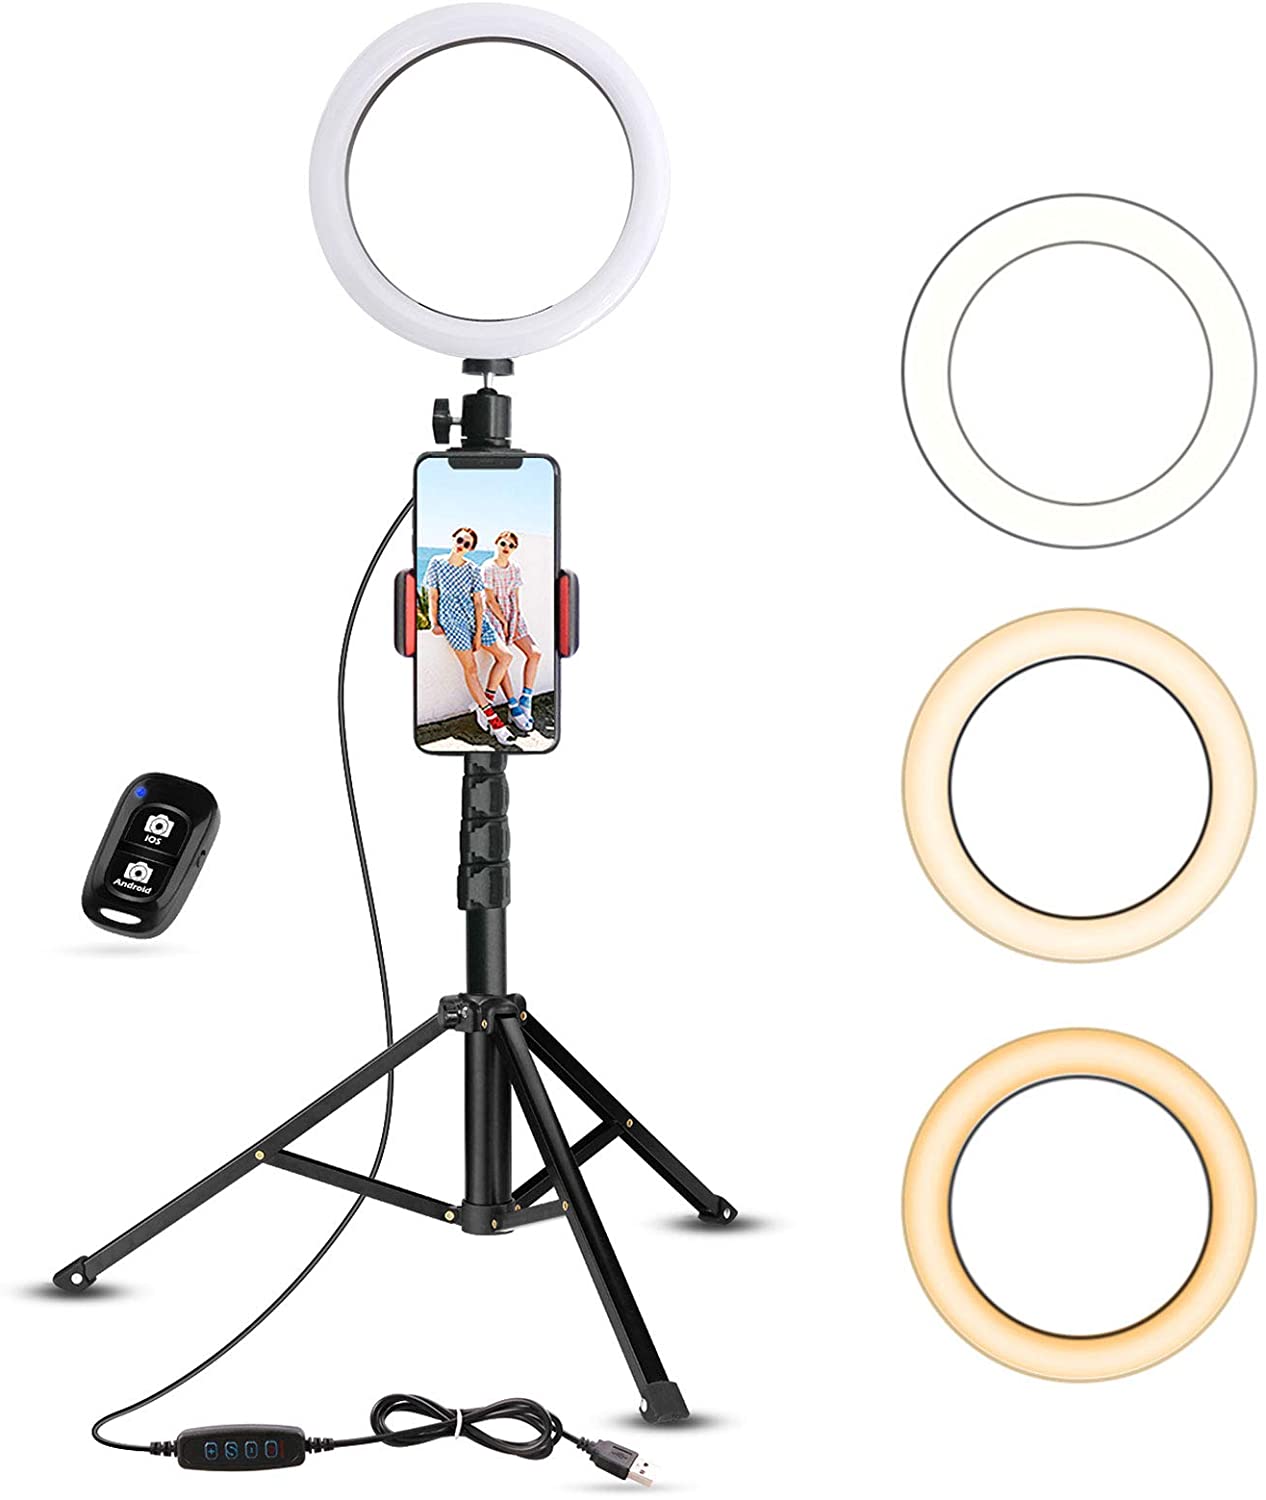 Ubeesize Selfie Ring Light With Tripod Stand